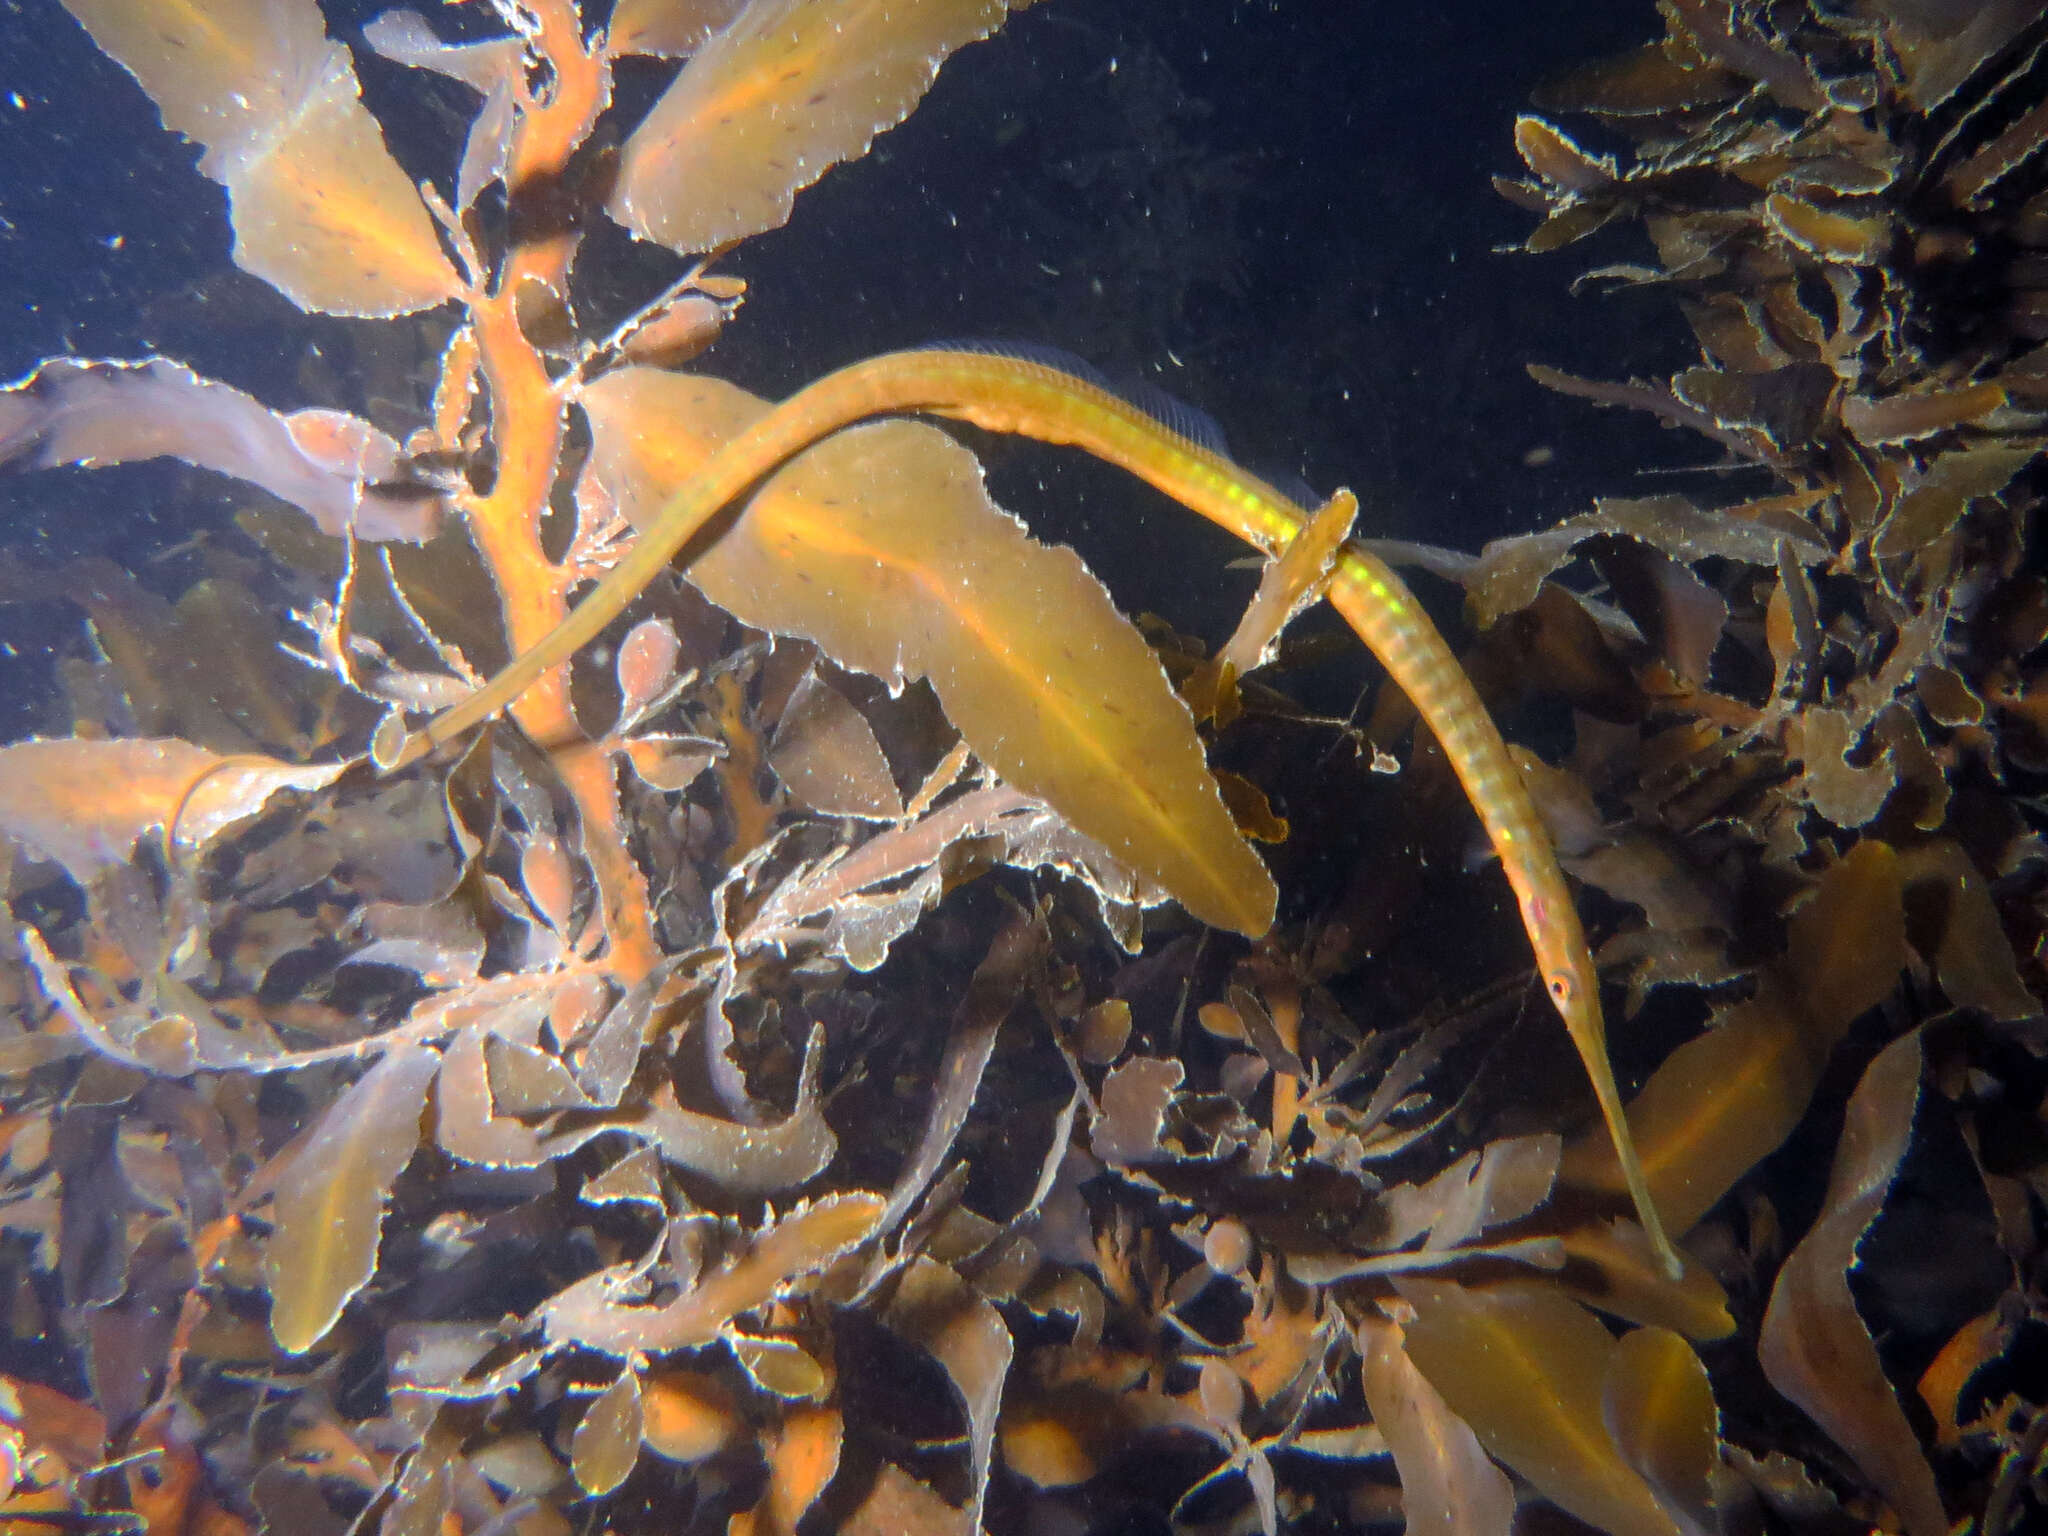 Image of Long-snouted pipefish